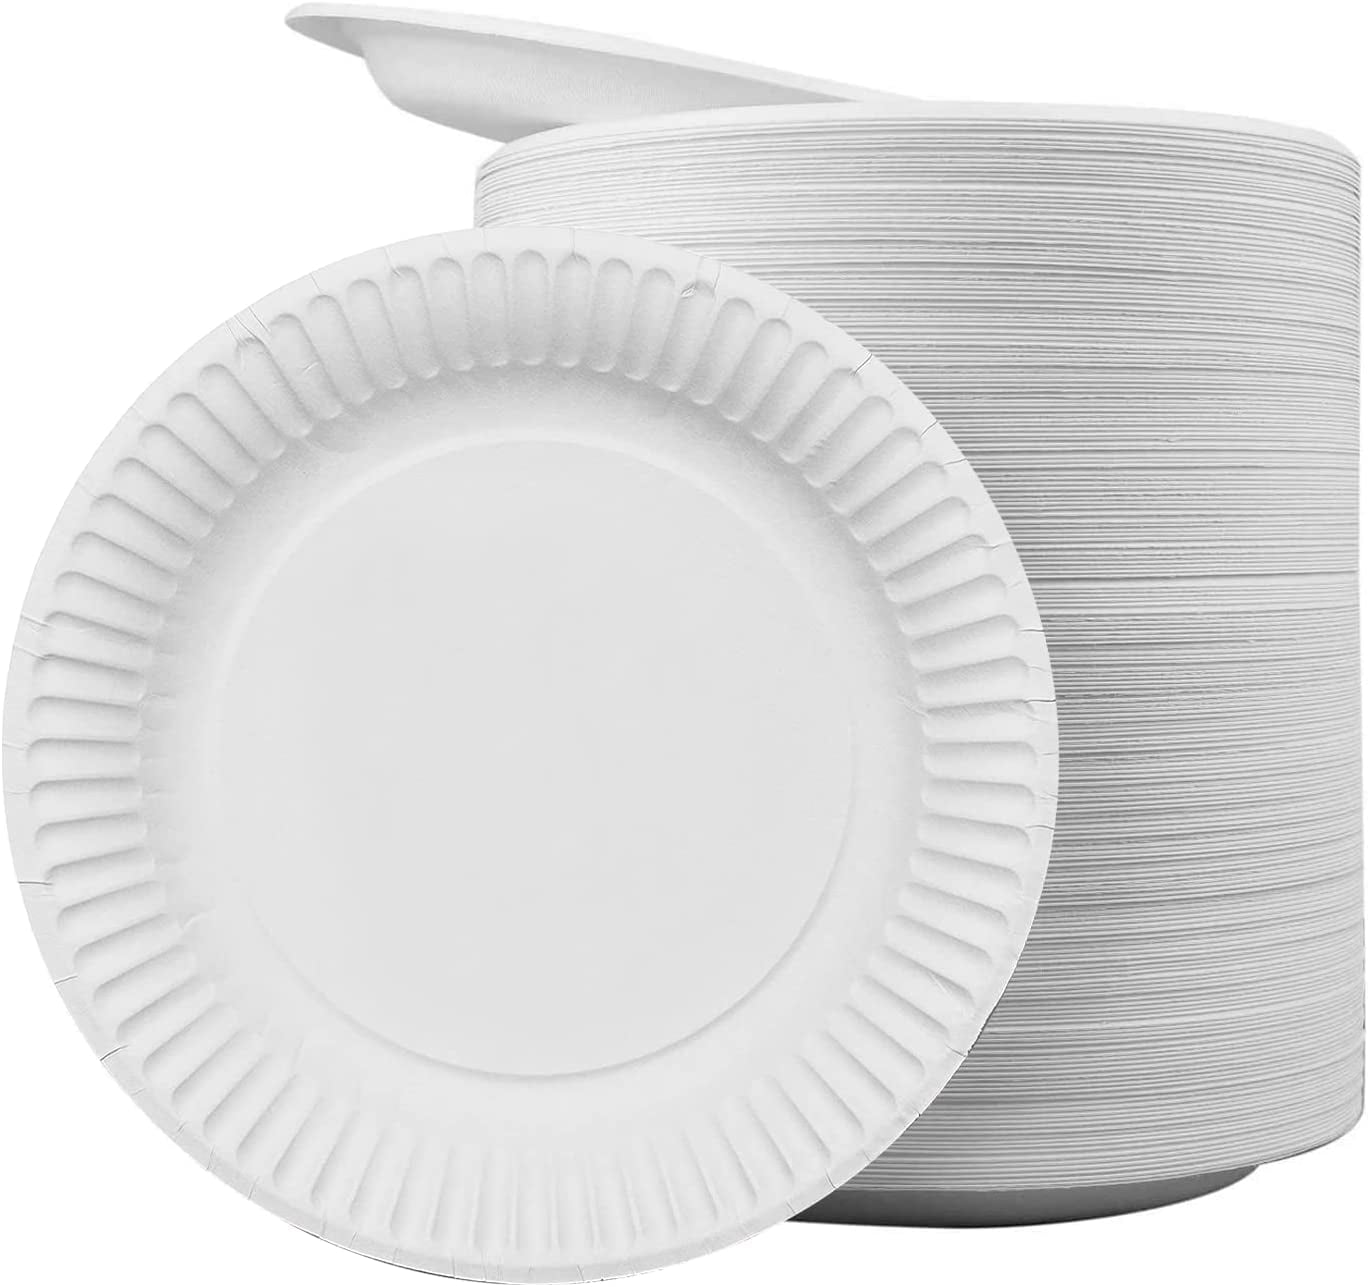 [700 COUNT] White Heavy Duty Disposable Paper Plates 9-Inch by EcoQuality -  Perfect for Parties, BBQ, Catering, Office, Event's, Pizza, Restaurants